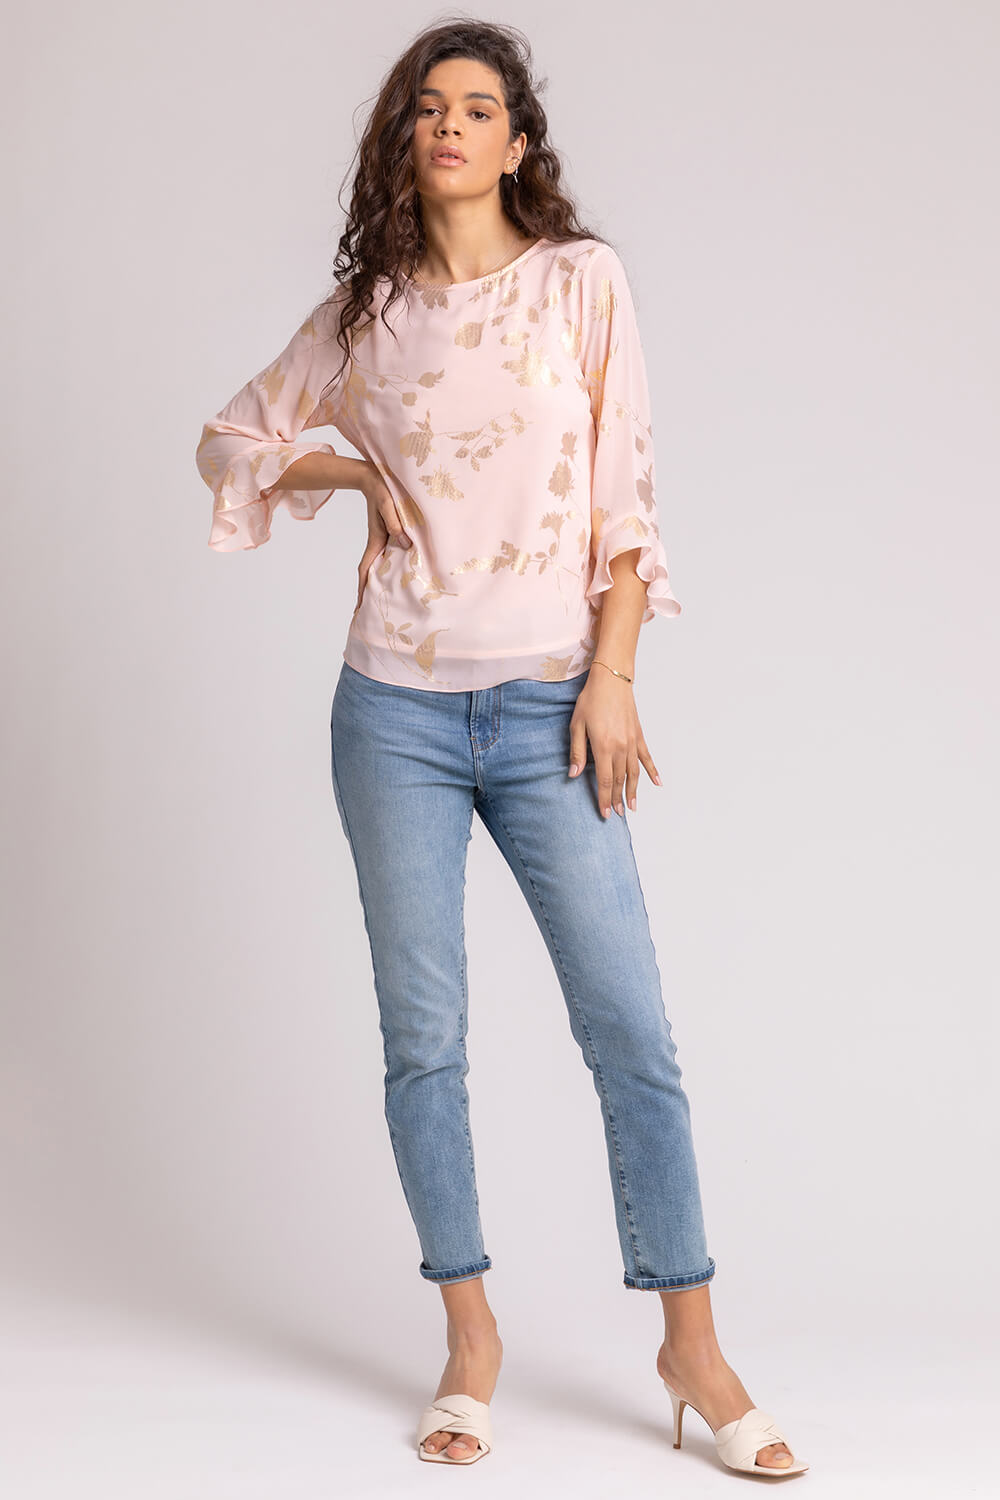 PINK Floral Foil Chiffon Flared Sleeve Top, Image 3 of 4